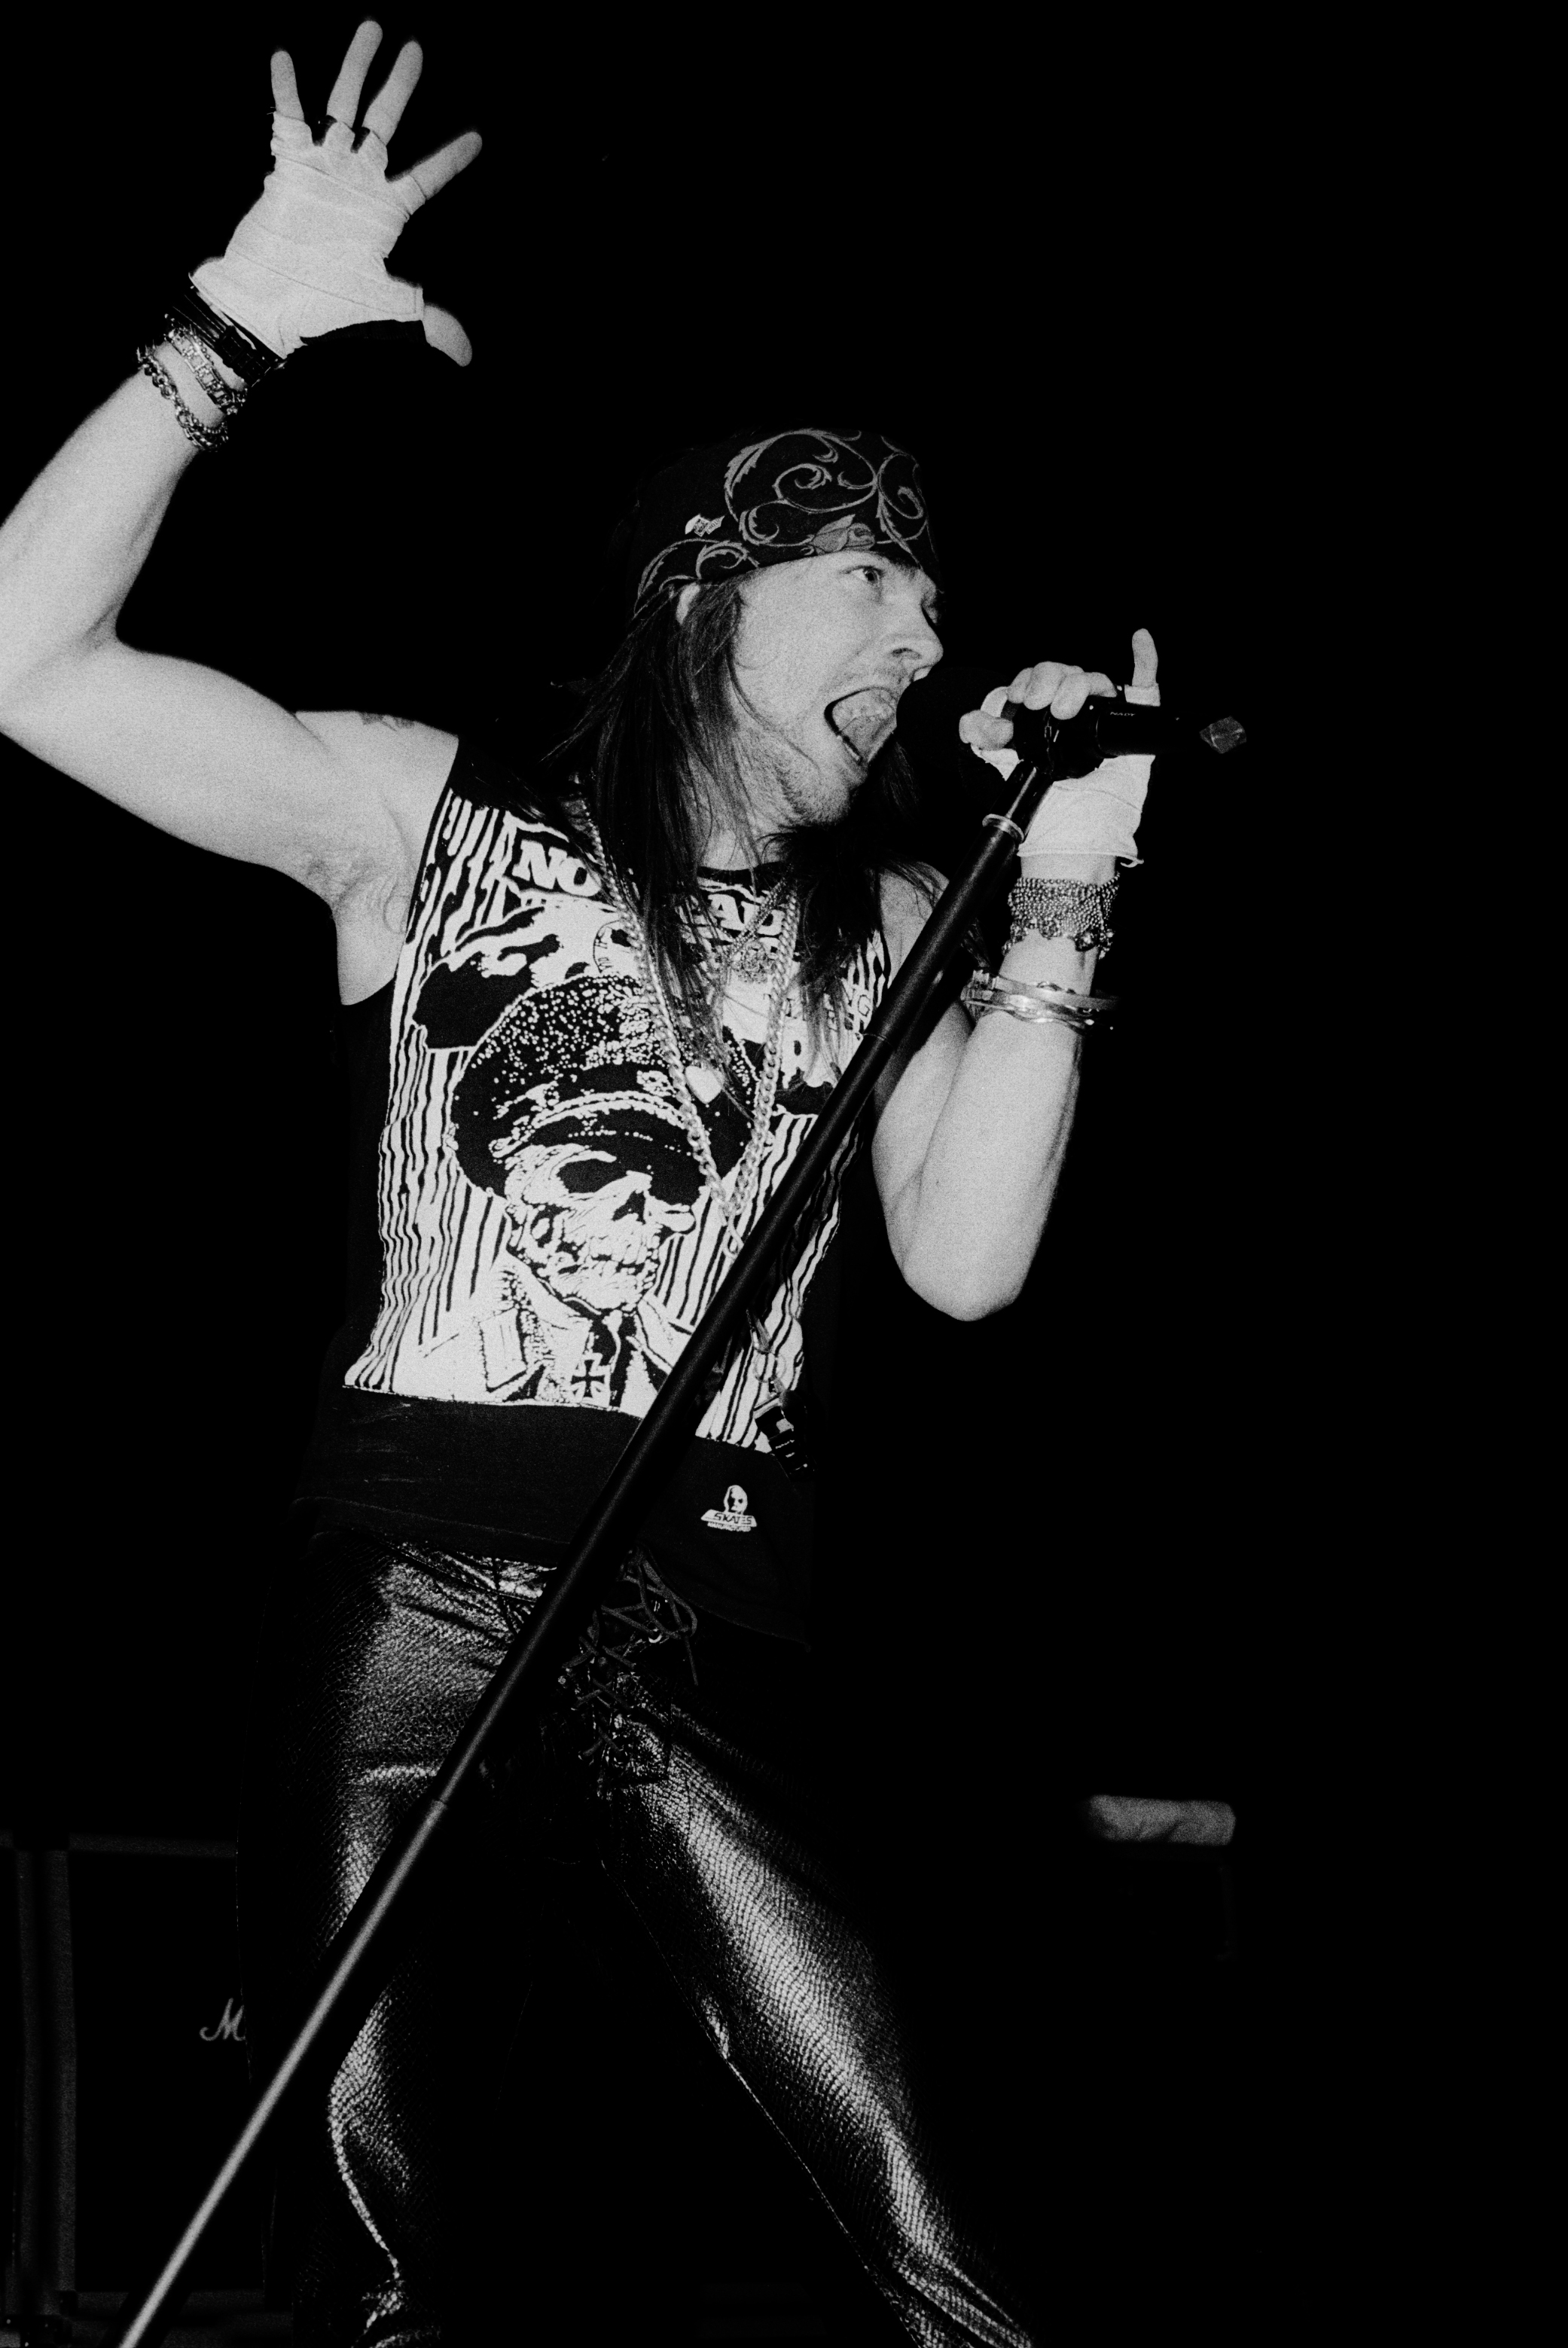 Axl Rose of Guns N' Roses performs at the Poplar Creek Music Theater on July 19, 1988, in Hoffman Estates, Illinois. | Source: Getty Images